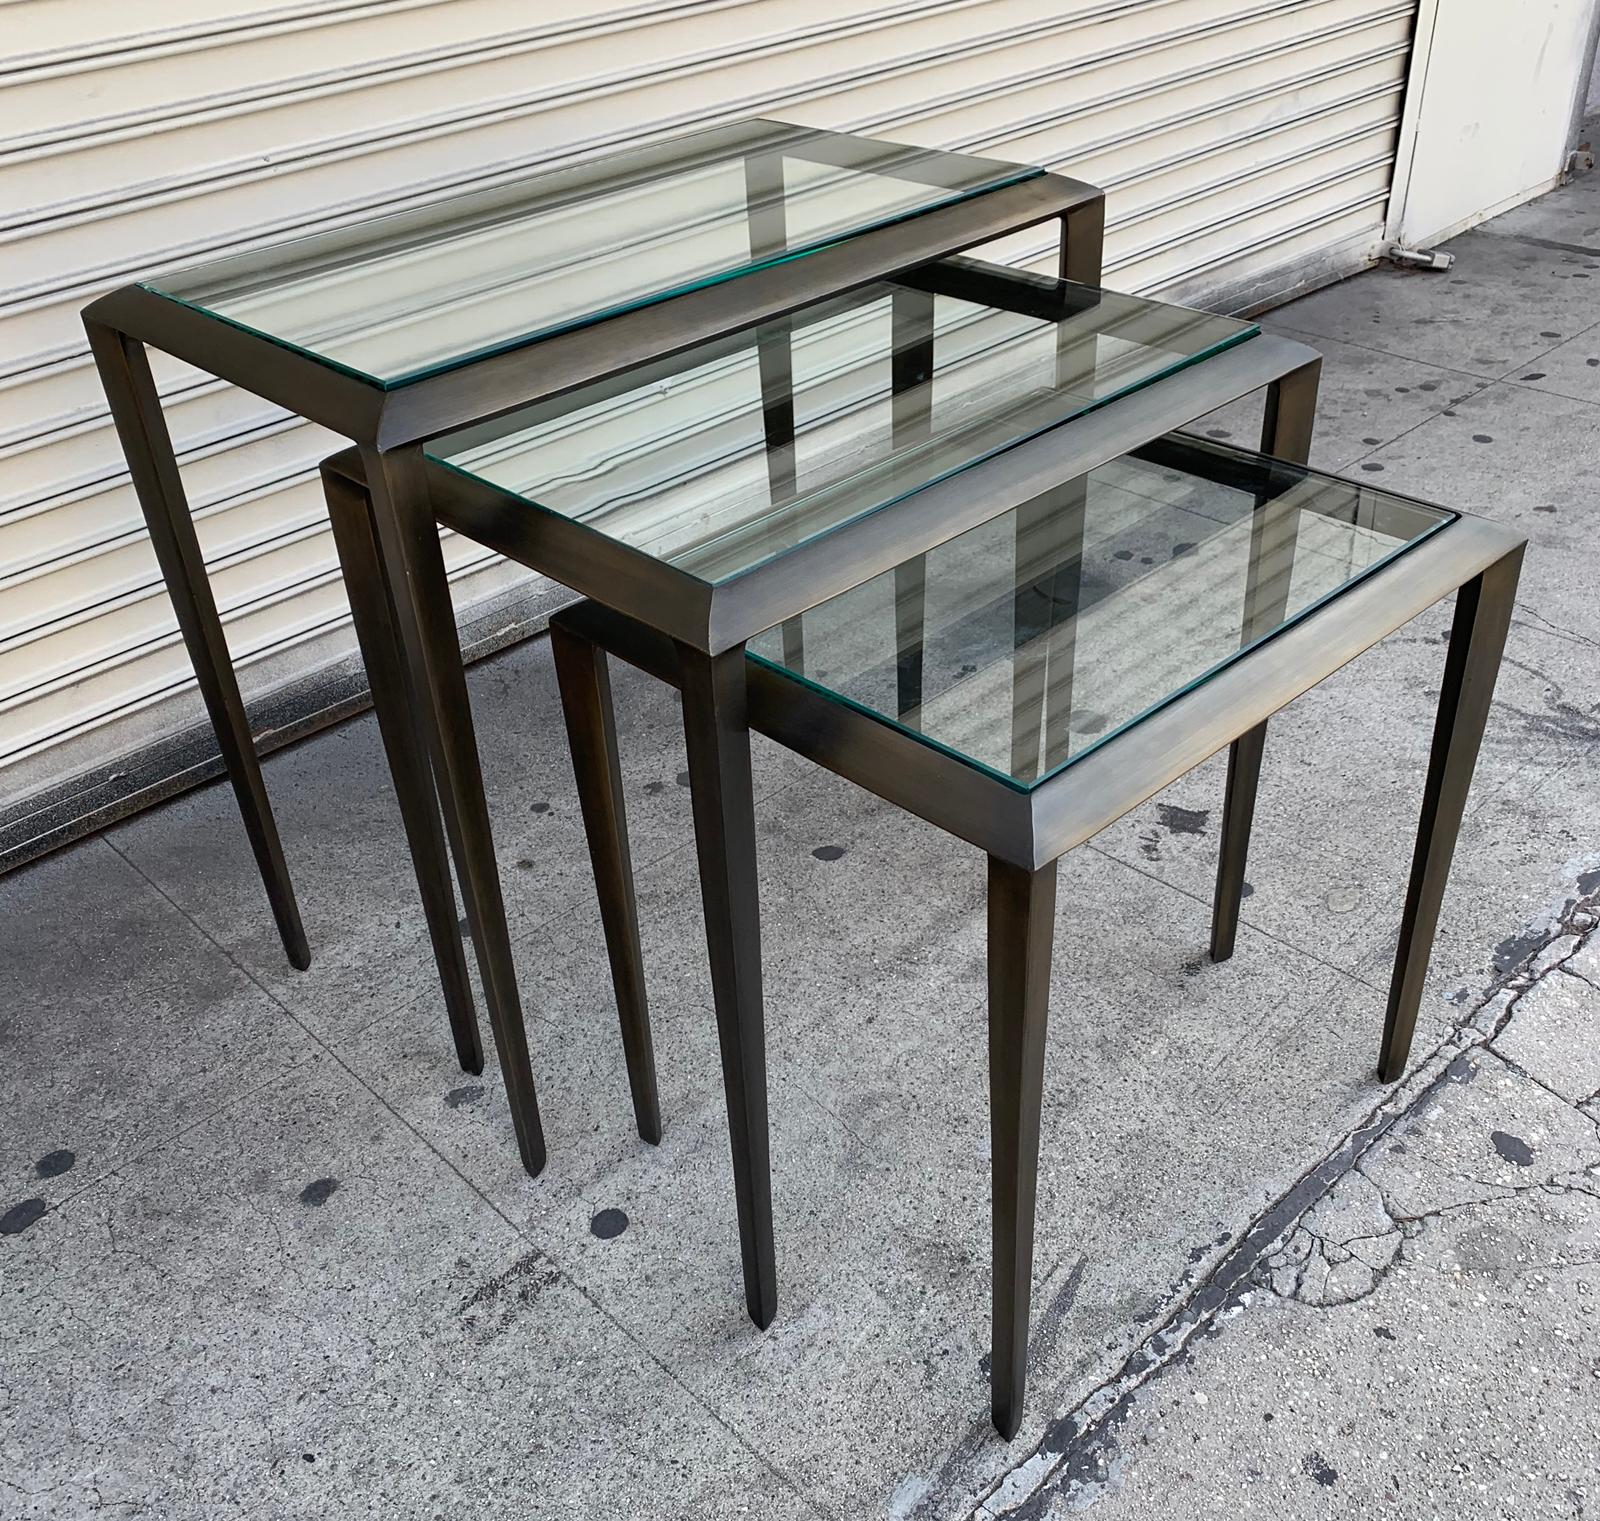 Beautiful set of nesting tables in antique brass with glass tables, the frames have a triangular shape, the tables have a beautiful patina and are in excellent condition.
Measurements:
30 wide x 18” deep x 28” high
26” wide x 18” deep x 25”